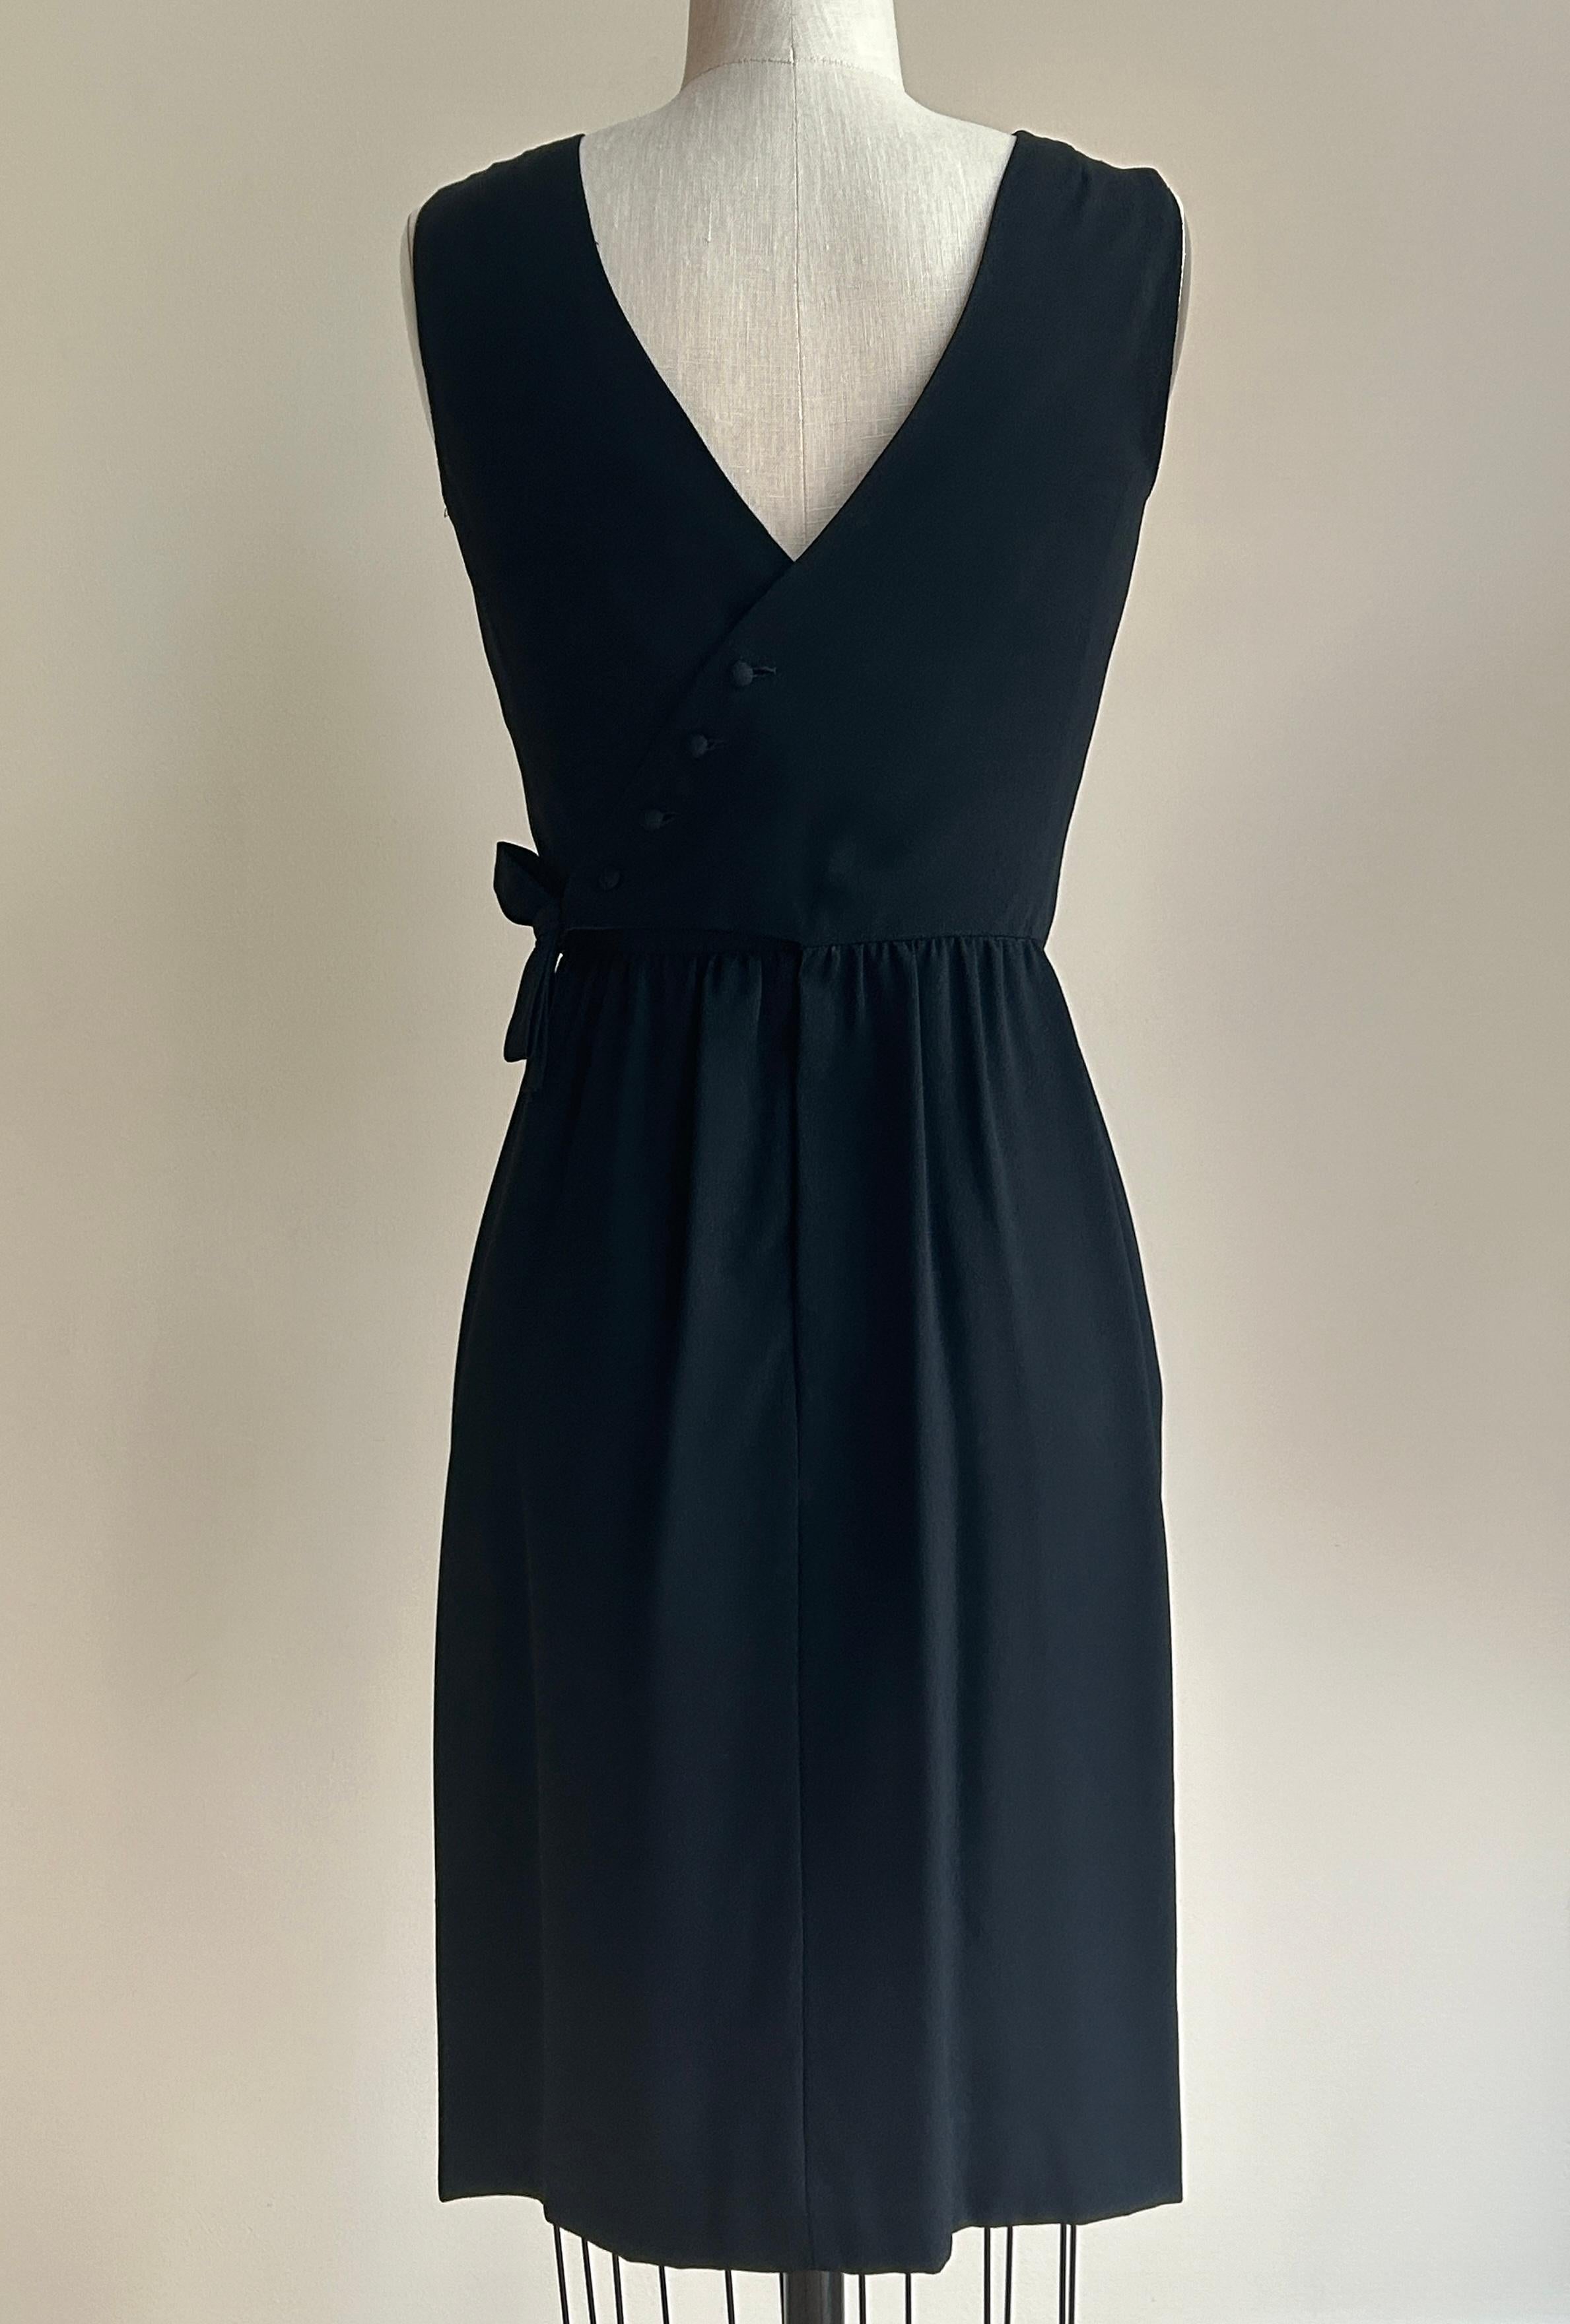 Vintage 1960s little black dress by Lanz Originals for Bullock's of Wilshire Collegienne department.  Crossover wrap detail at back. fastens with snaps, hook and eye, and four cloth covered buttons. Bow at side-back snaps in place. Light gathering